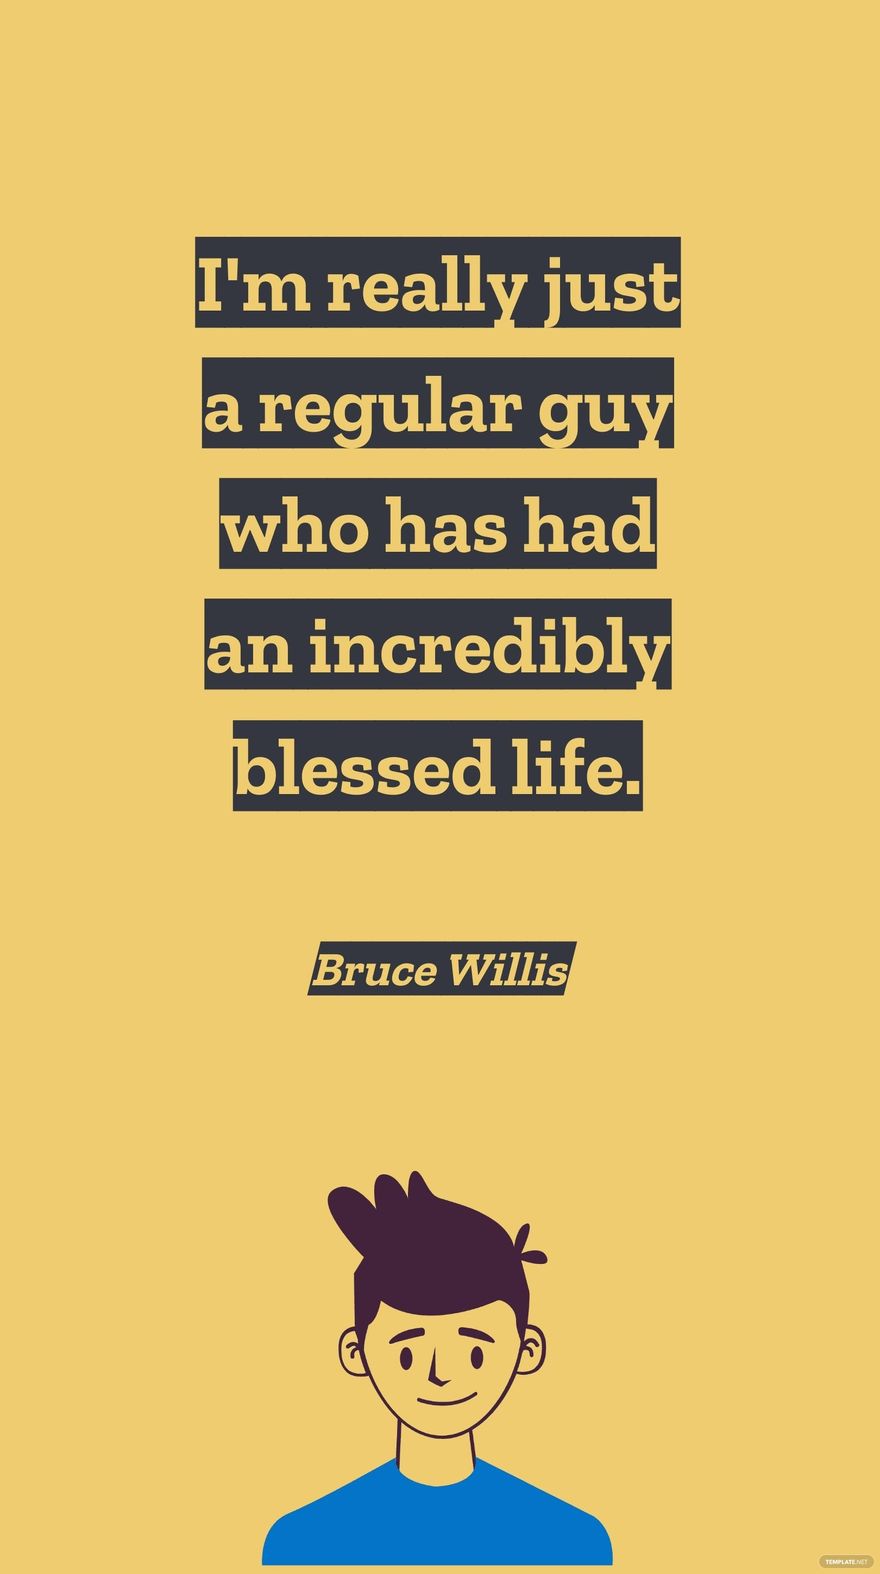 Bruce Willis - I'm really just a regular guy who has had an incredibly blessed life. in JPG